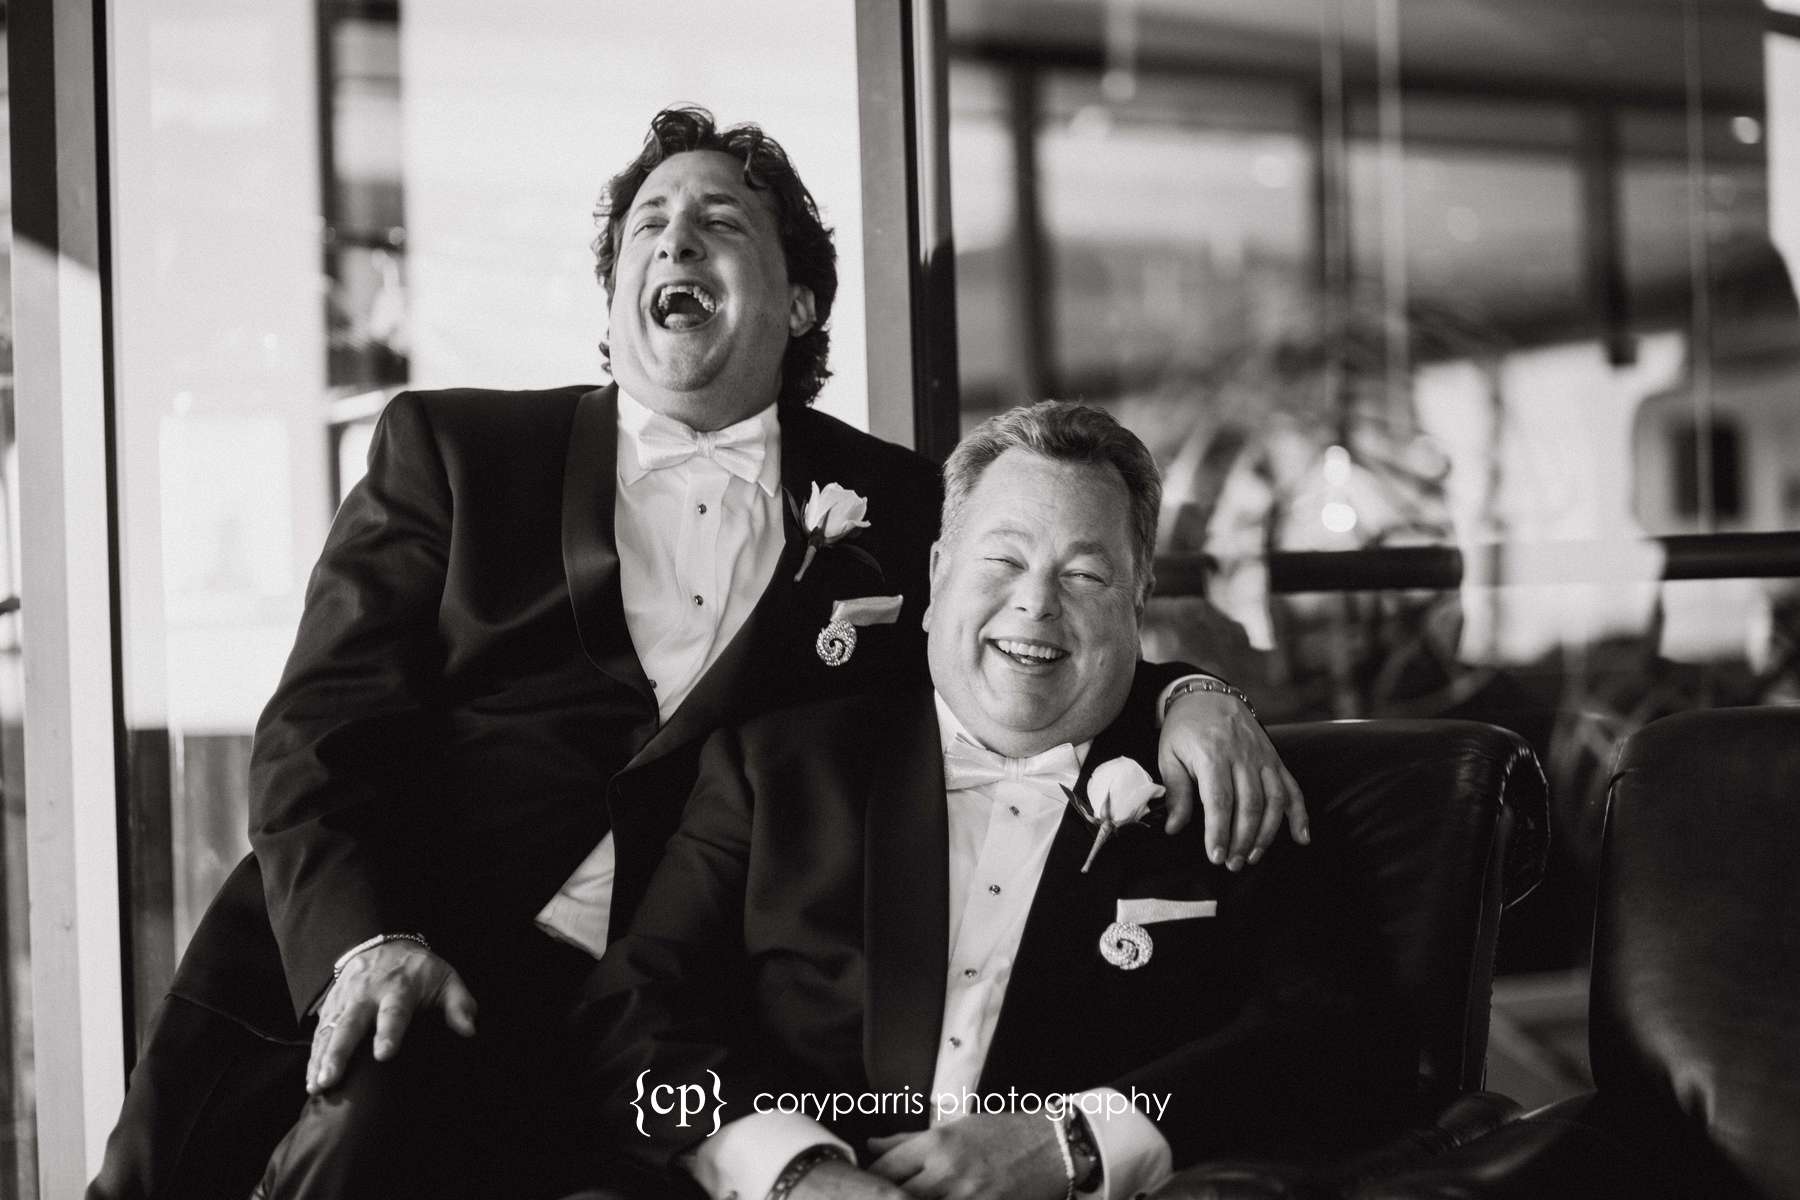 Two grooms laughing together